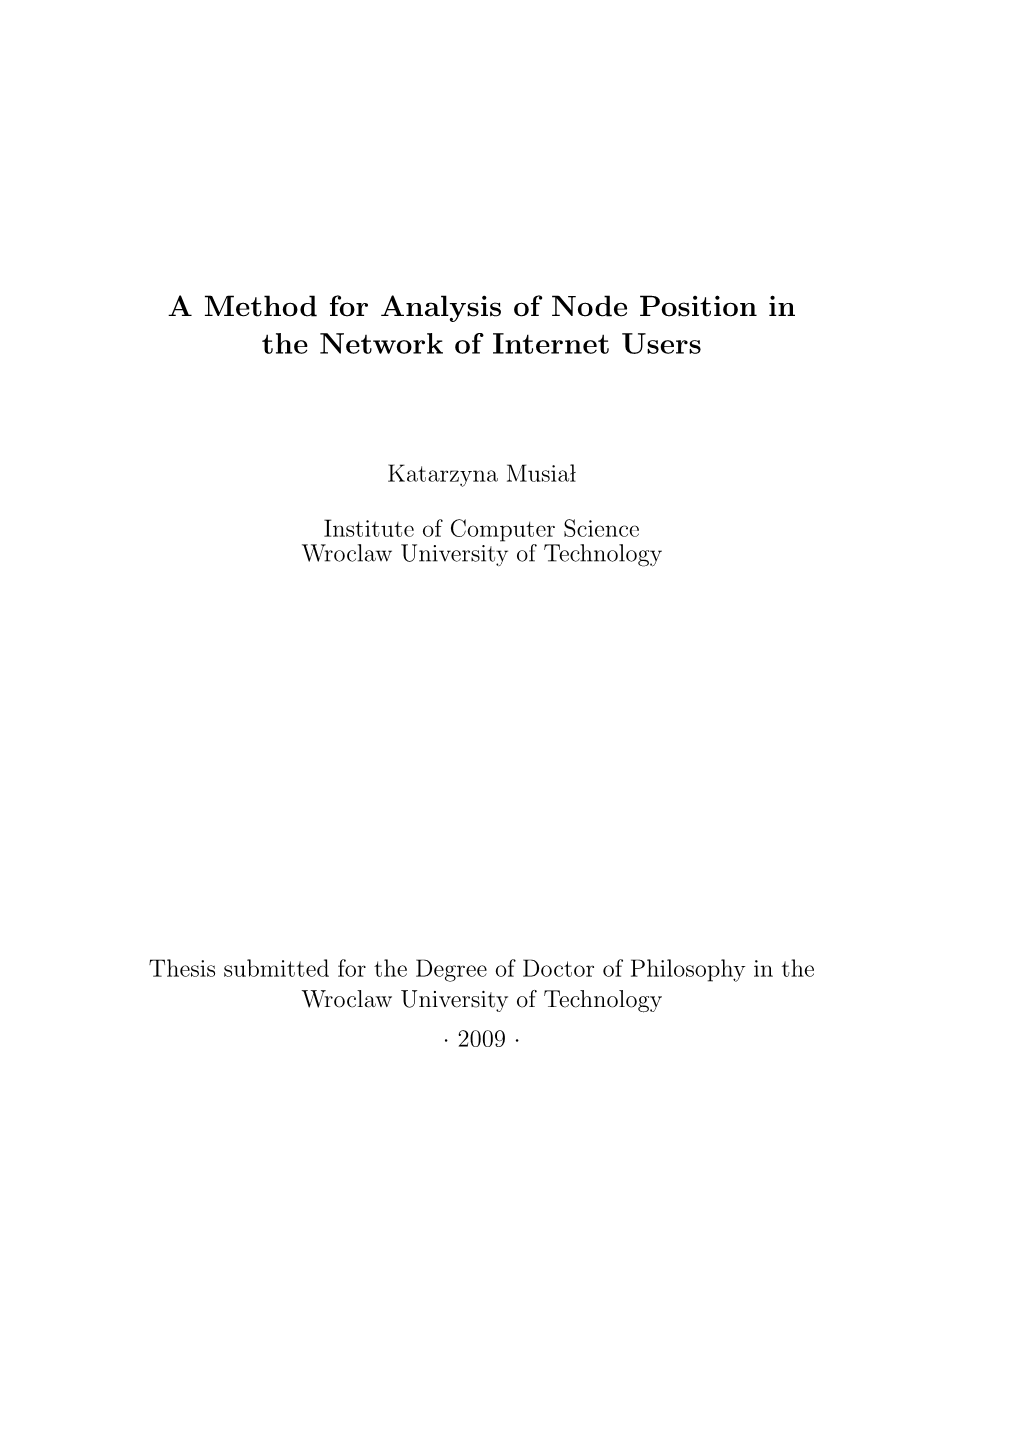 A Method for Analysis of Node Position in the Network of Internet Users